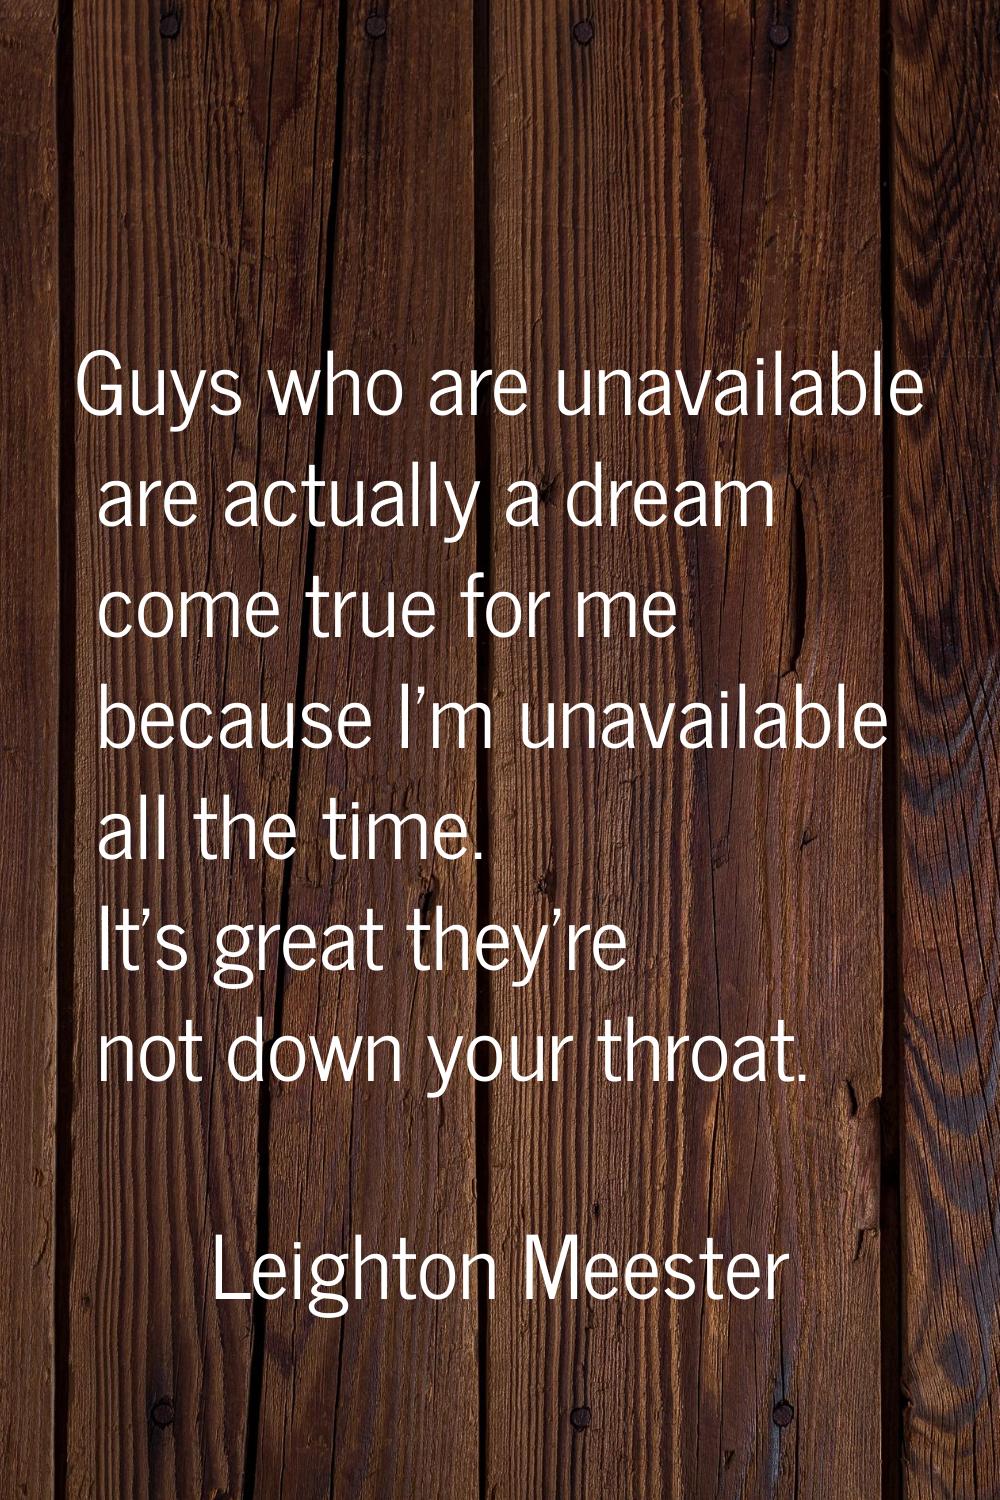 Guys who are unavailable are actually a dream come true for me because I'm unavailable all the time